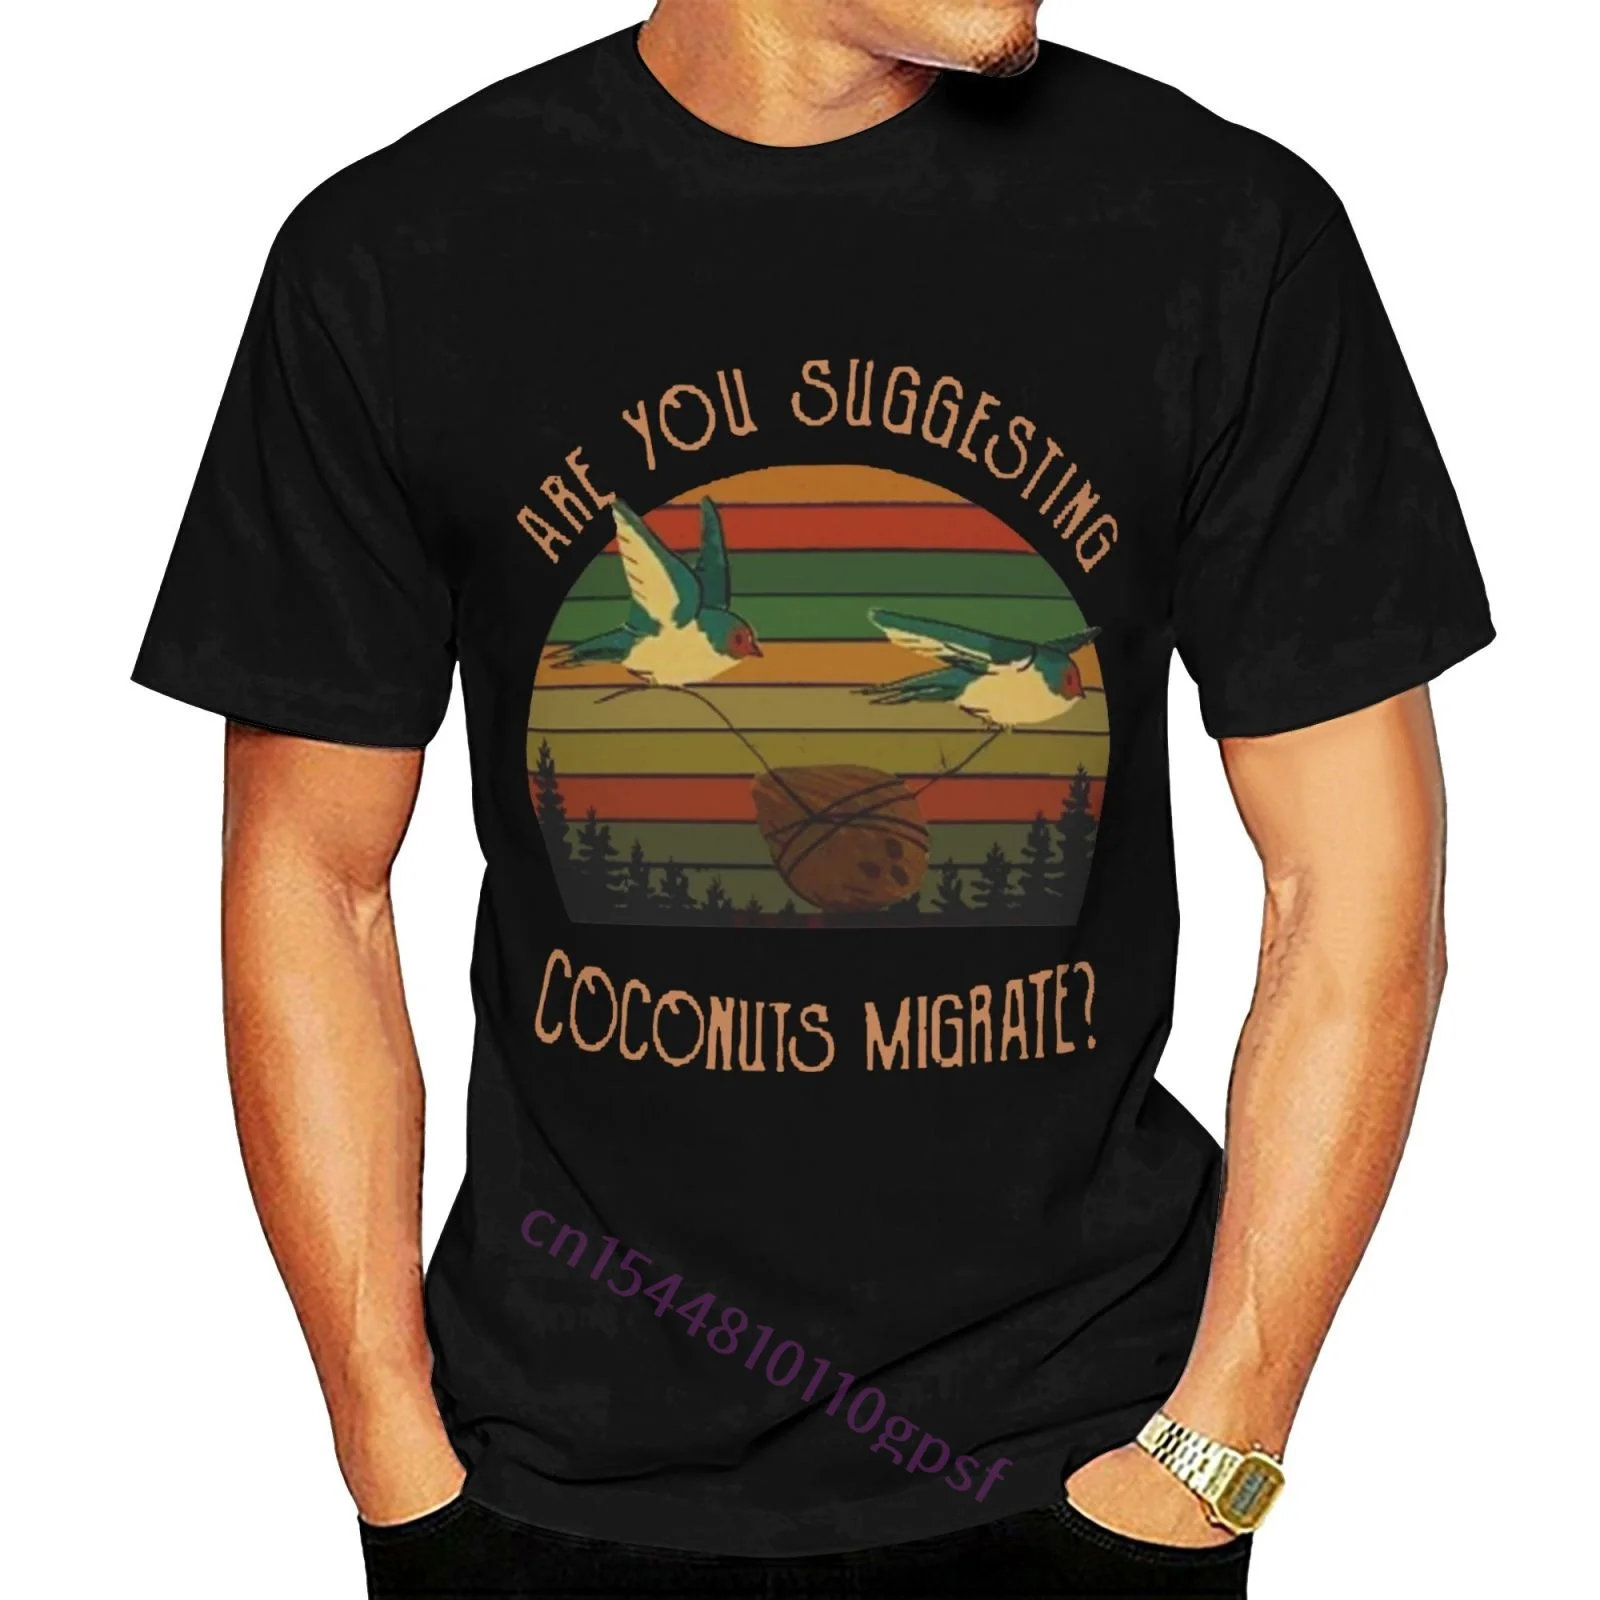 

Are You Suggesting Coconuts Migrate Black T-shirt Men T Shirt Round Collar Short Sleeve Tee Shirts Top Tee